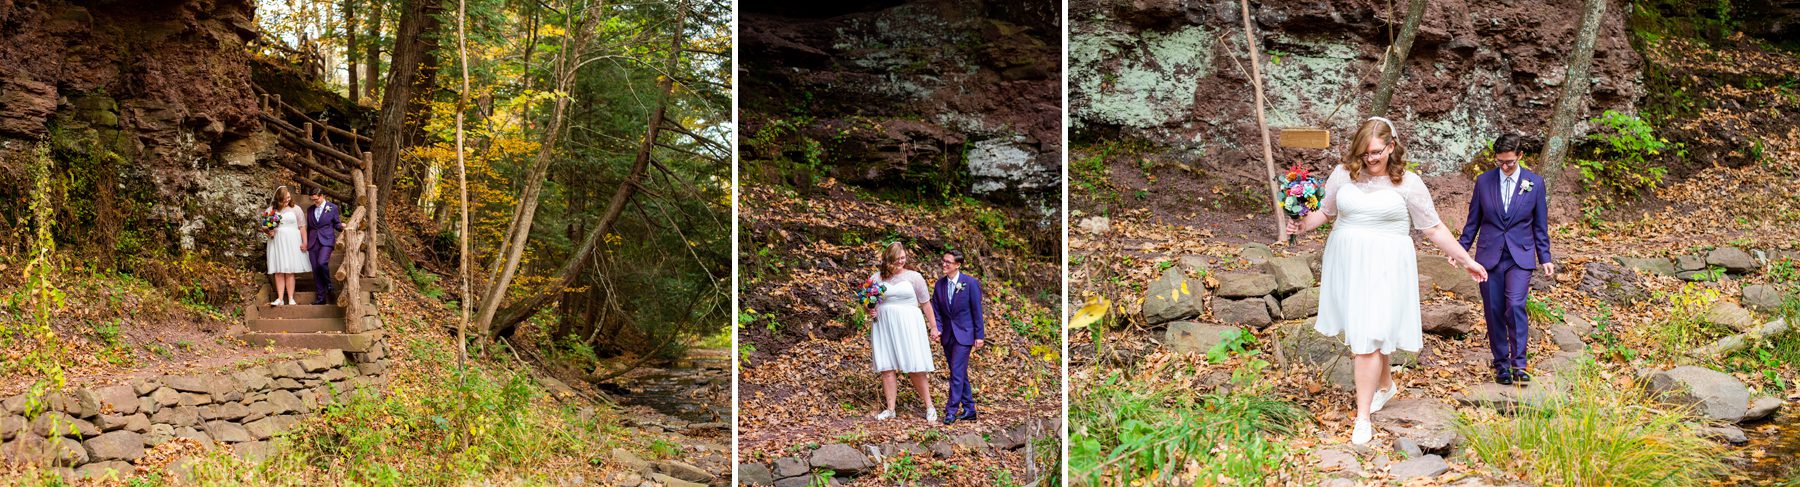 Where to Get Married in the Catskills